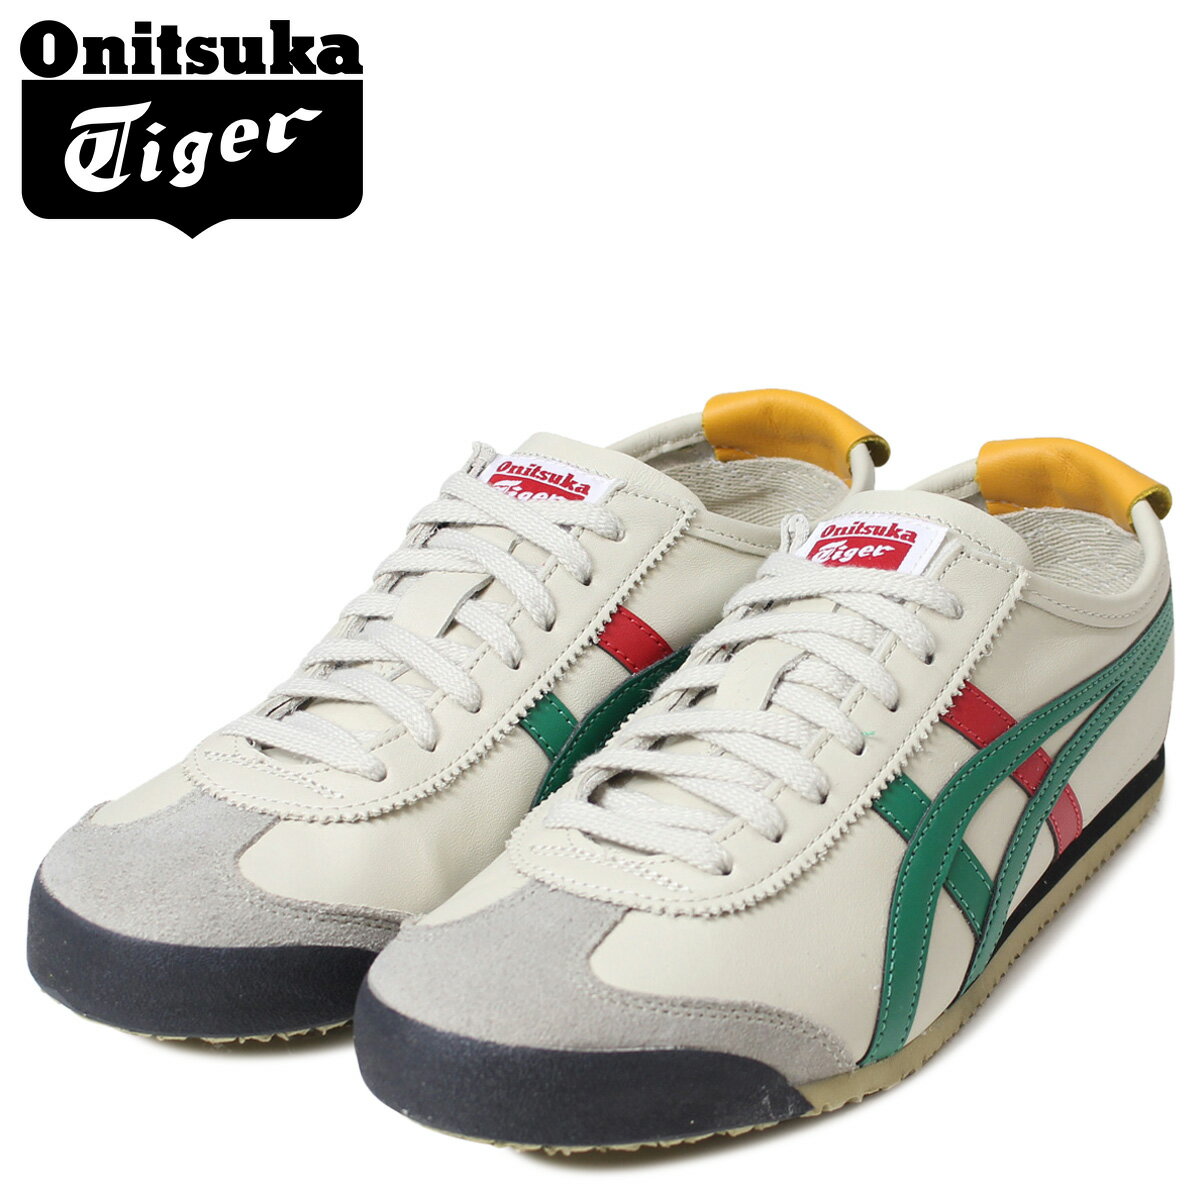 japanese trainers tiger